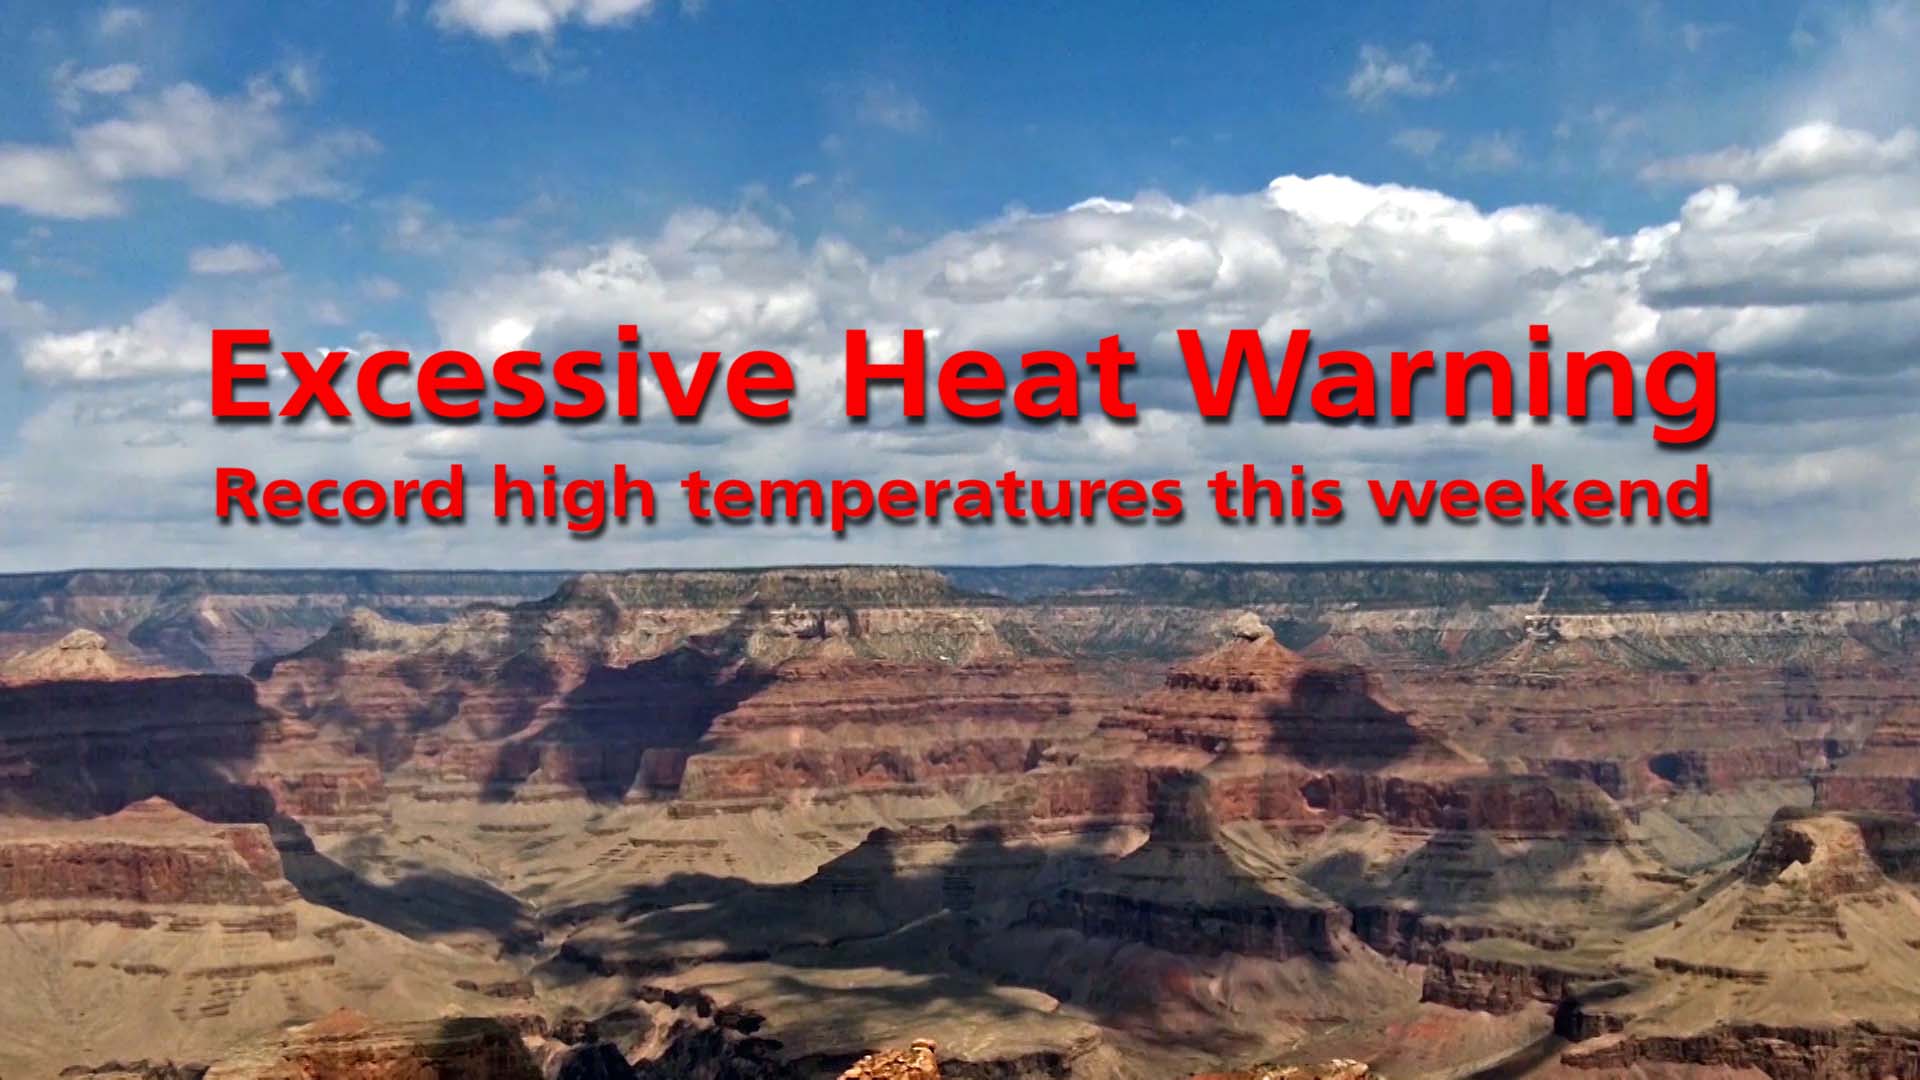 Image of clouds over Grand Canyon; text reads "Excessive Heat Warning record high temperatures this weekend"